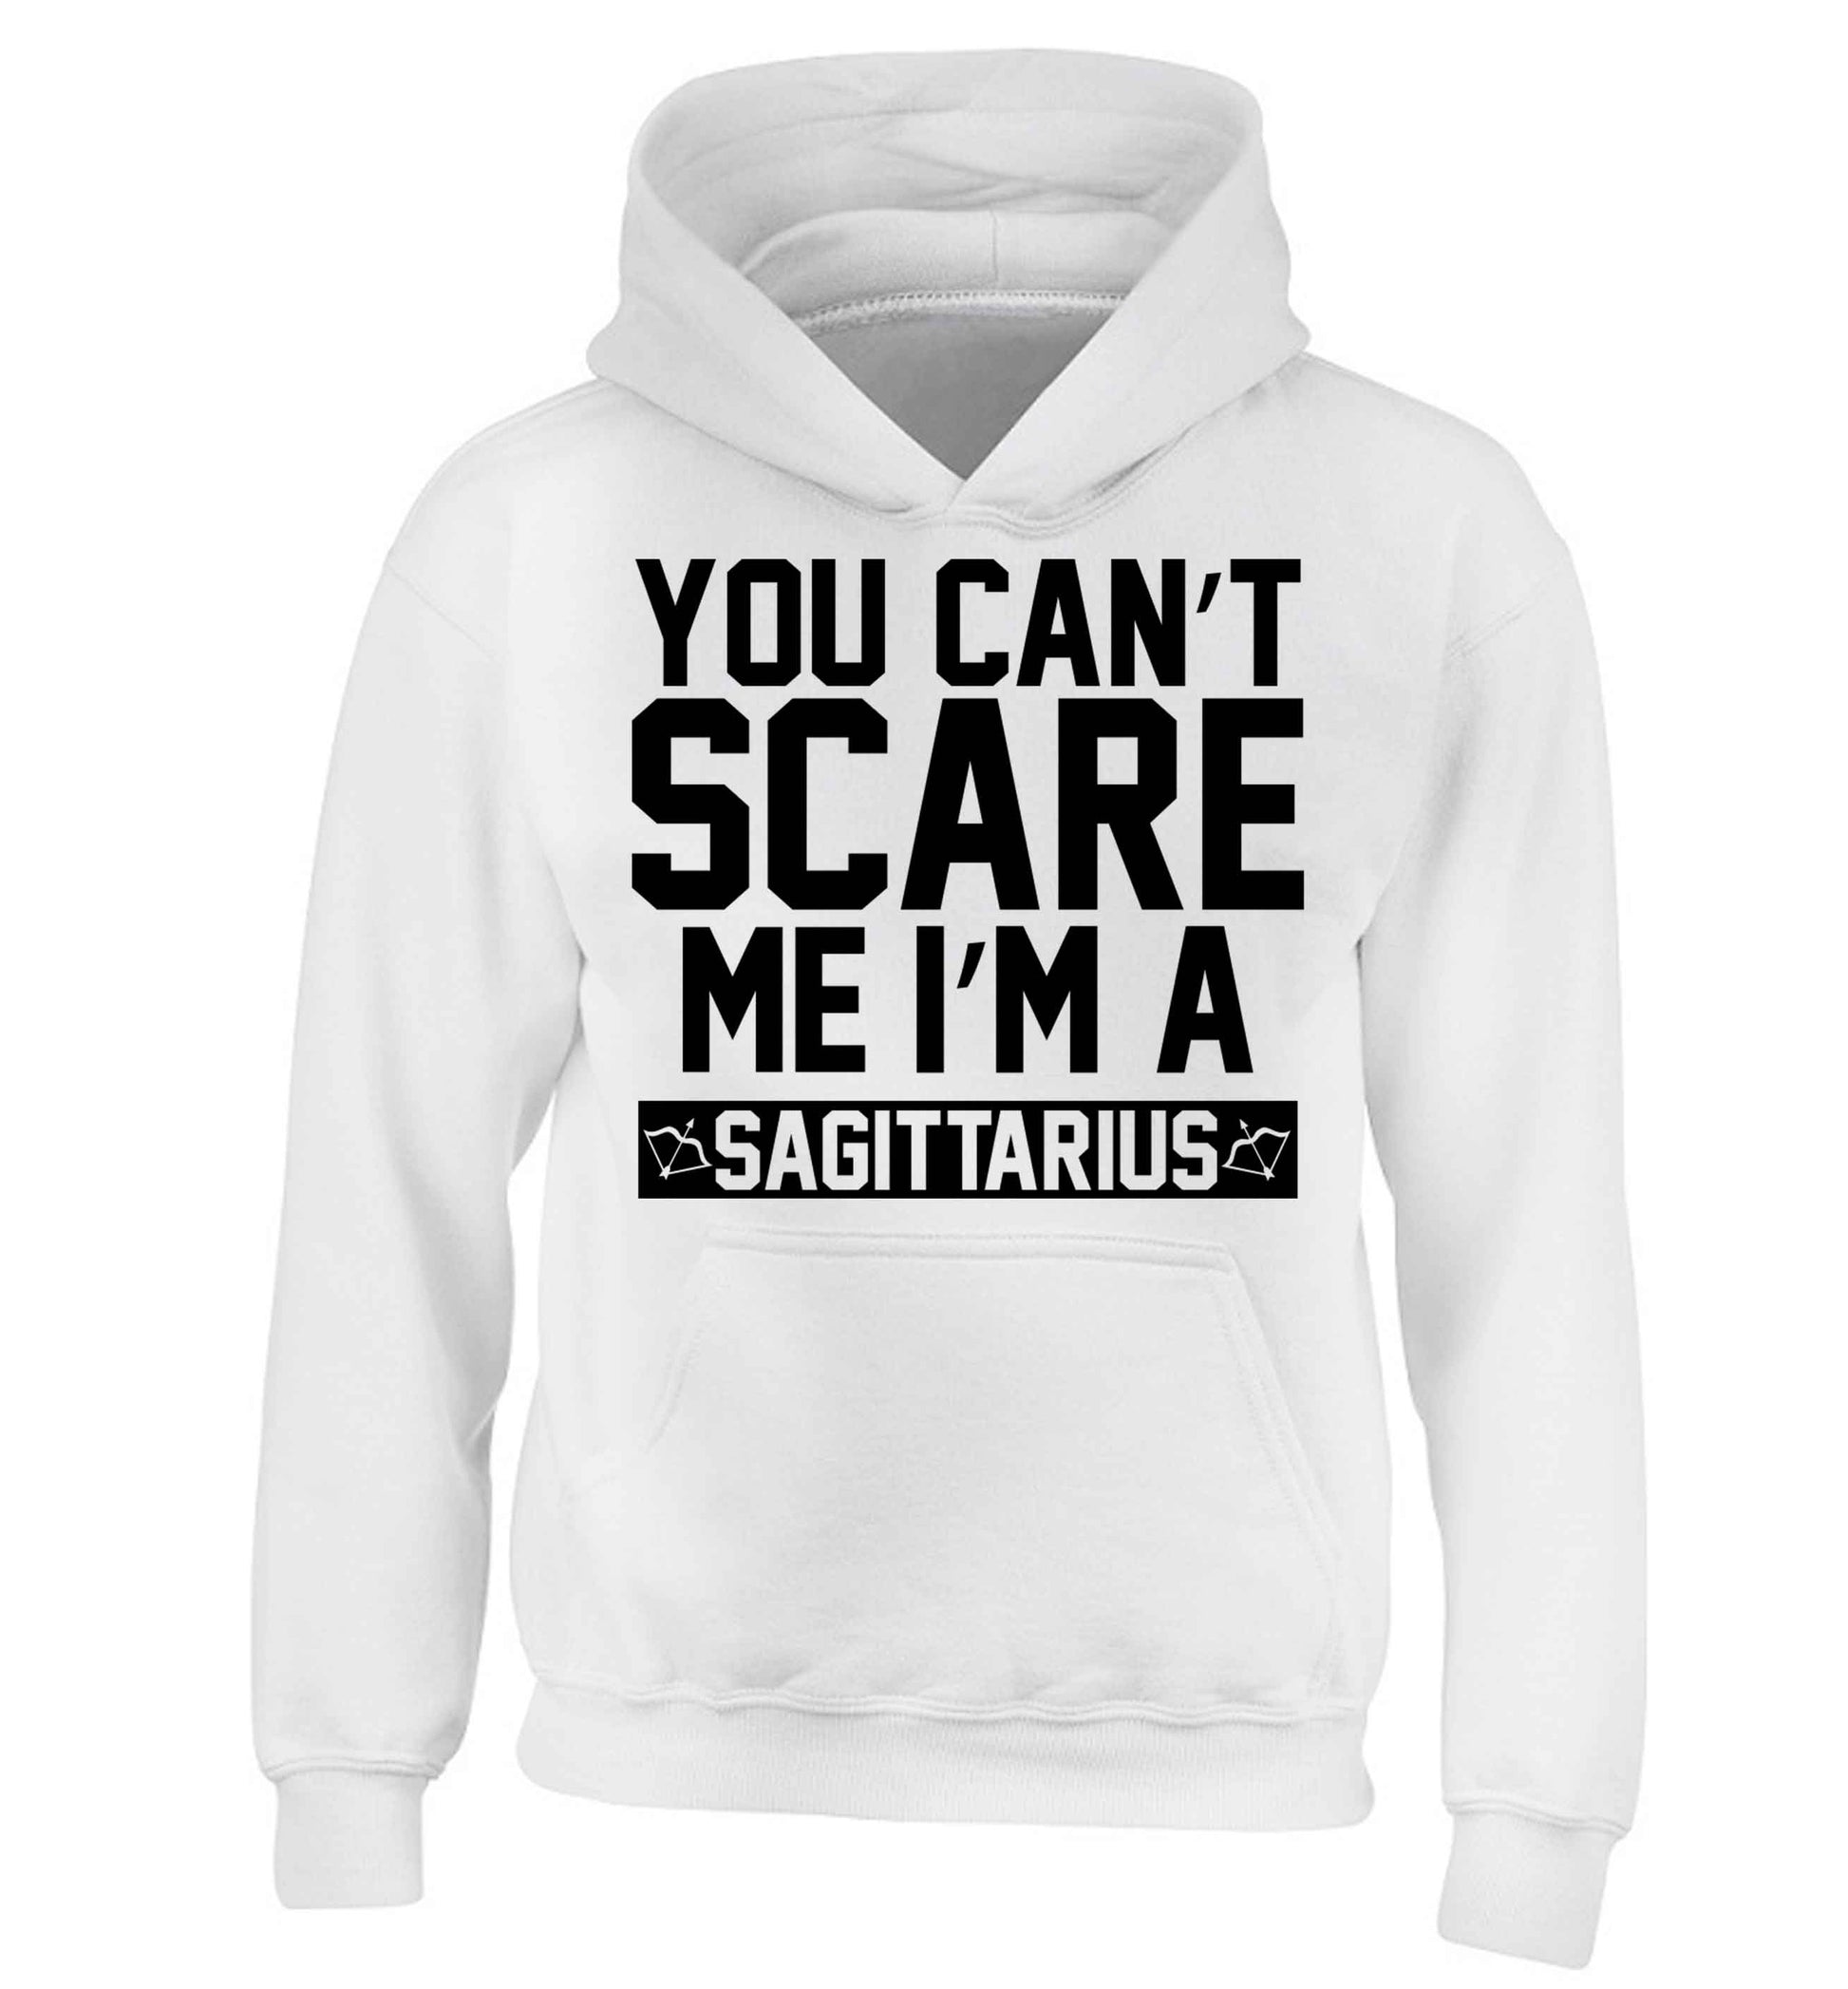 You can't scare me I'm a sagittarius children's white hoodie 12-13 Years